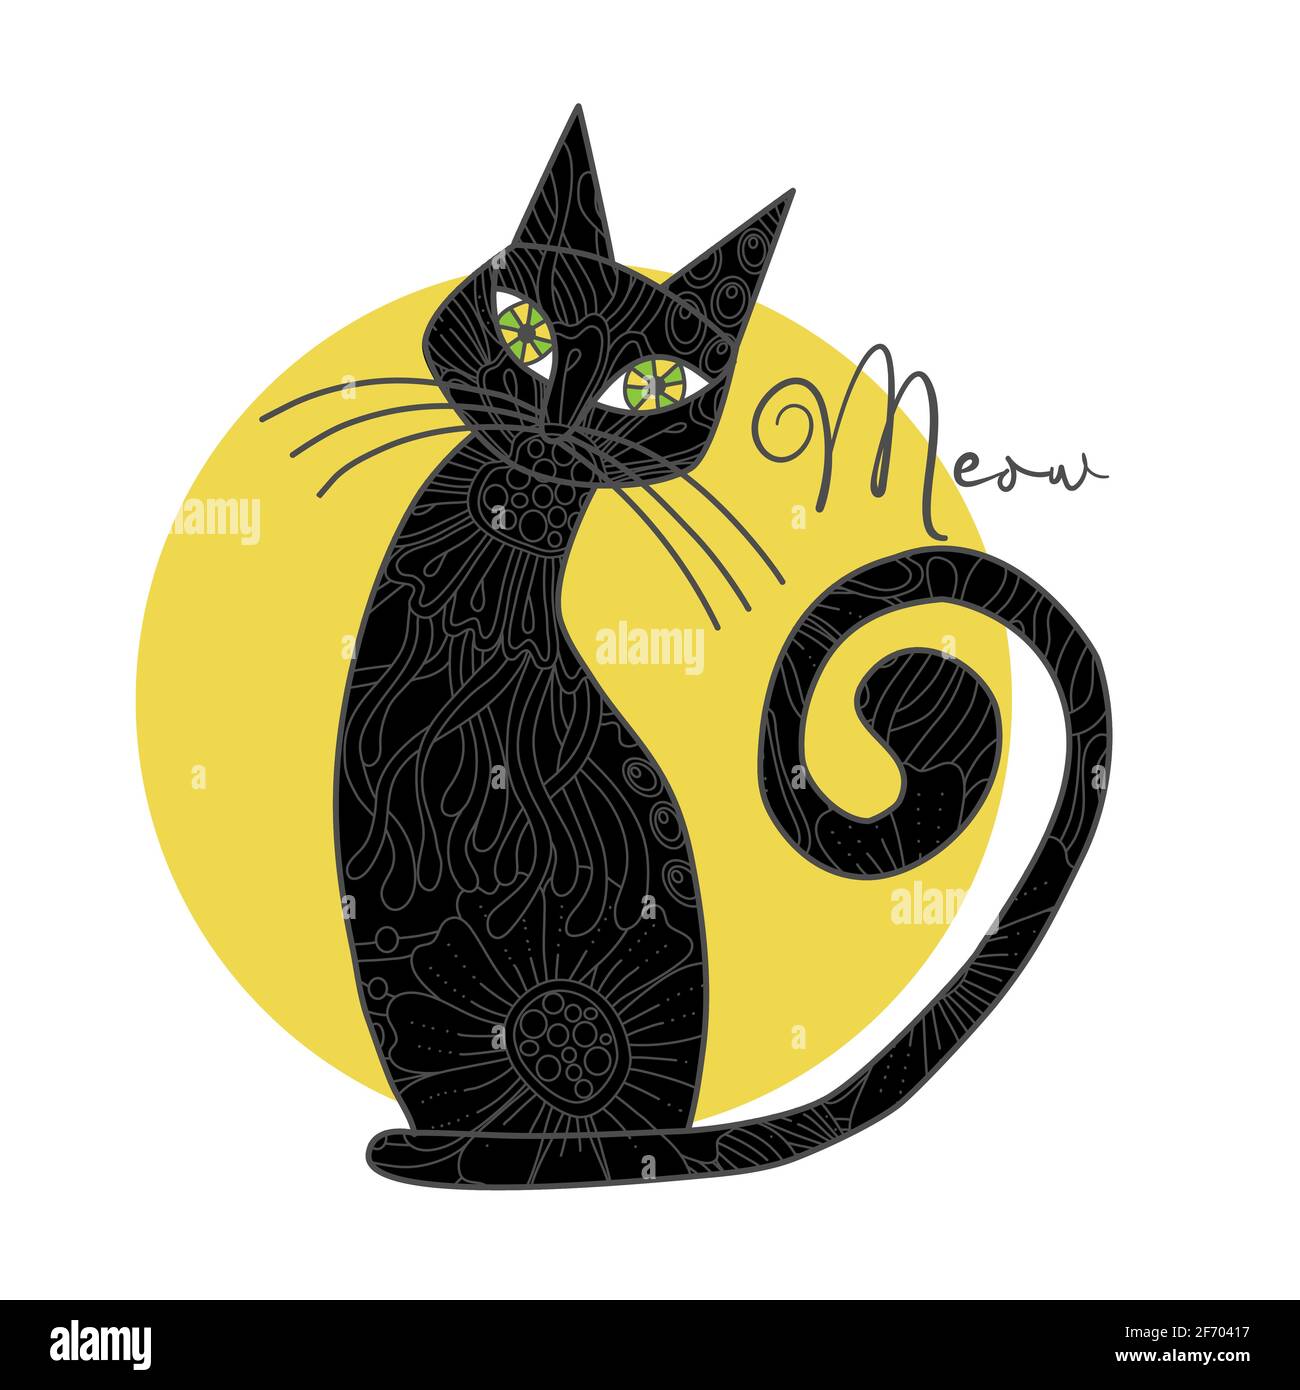 Cute black cat with doodle abstract flowers and leaves, quote - meow. Vector hand drawn outline illustration. Stock Vector